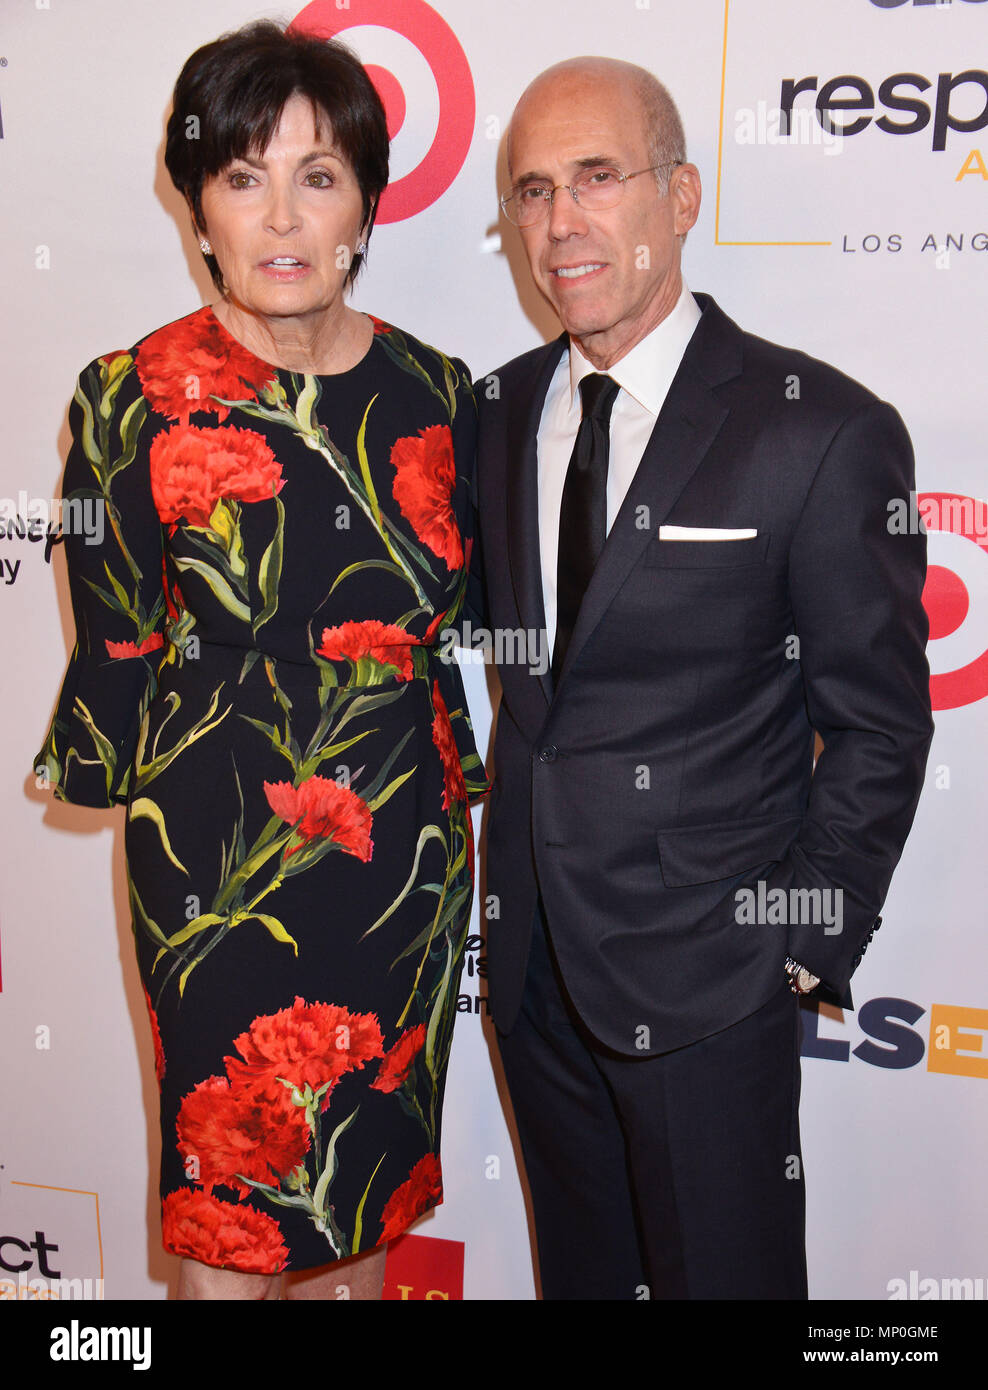 Jeffrey Katzenberg, Marilyn Katzenberg 081 at the 2016 GLSEN Respect Awards at the Beverly Wilshire Hotel in Beverly Hills. October 21, 2016.Jeffrey Katzenberg, Marilyn Katzenberg 081 ------------- Red Carpet Event, Vertical, USA, Film Industry, Celebrities,  Photography, Bestof, Arts Culture and Entertainment, Topix Celebrities fashion /  Vertical, Best of, Event in Hollywood Life - California,  Red Carpet and backstage, USA, Film Industry, Celebrities,  movie celebrities, TV celebrities, Music celebrities, Photography, Bestof, Arts Culture and Entertainment,  Topix, vertical,  family from fr Stock Photo